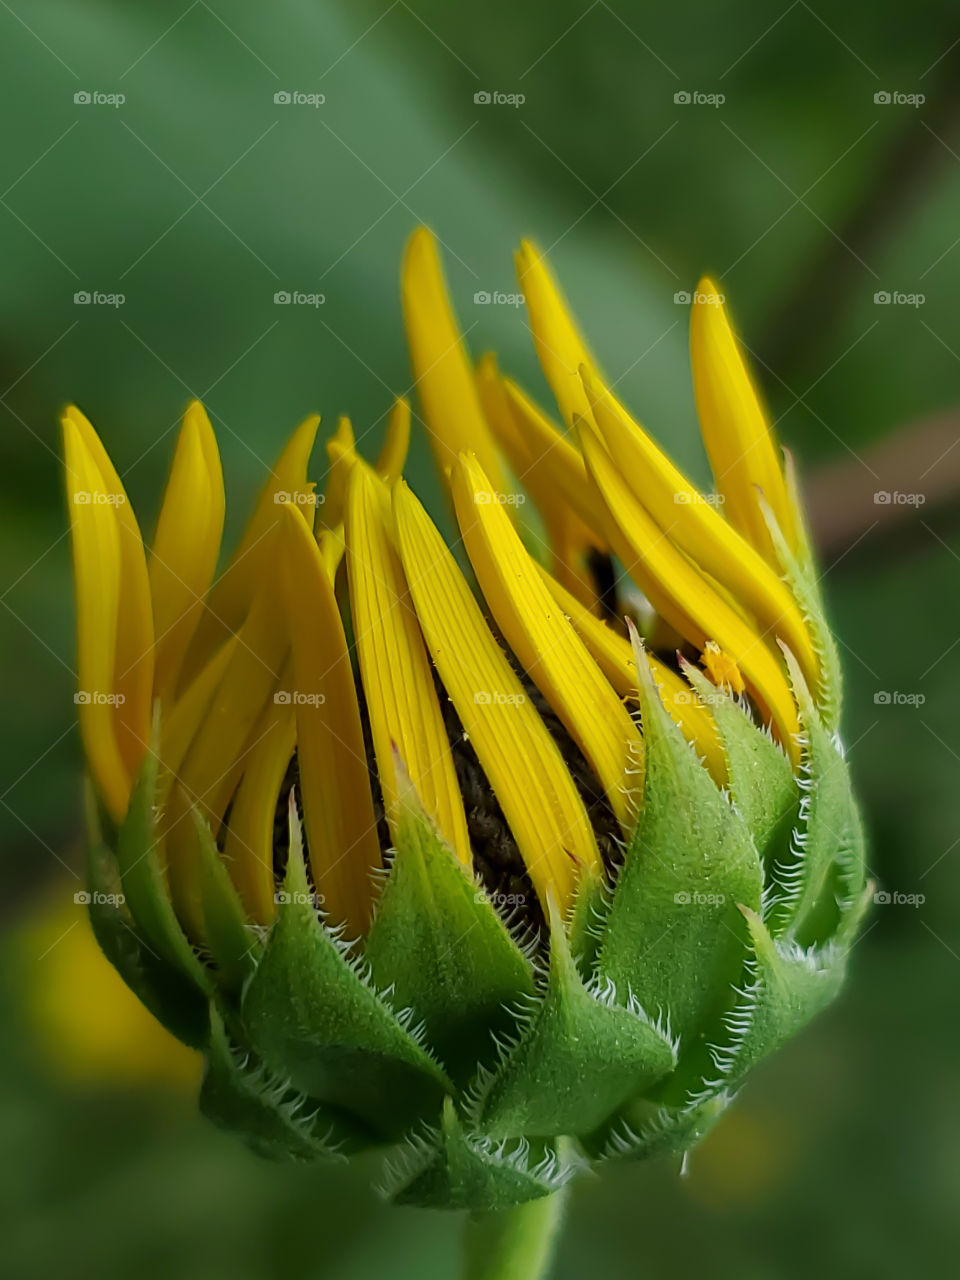 Closeup of a North American common sunflower before full bloom.